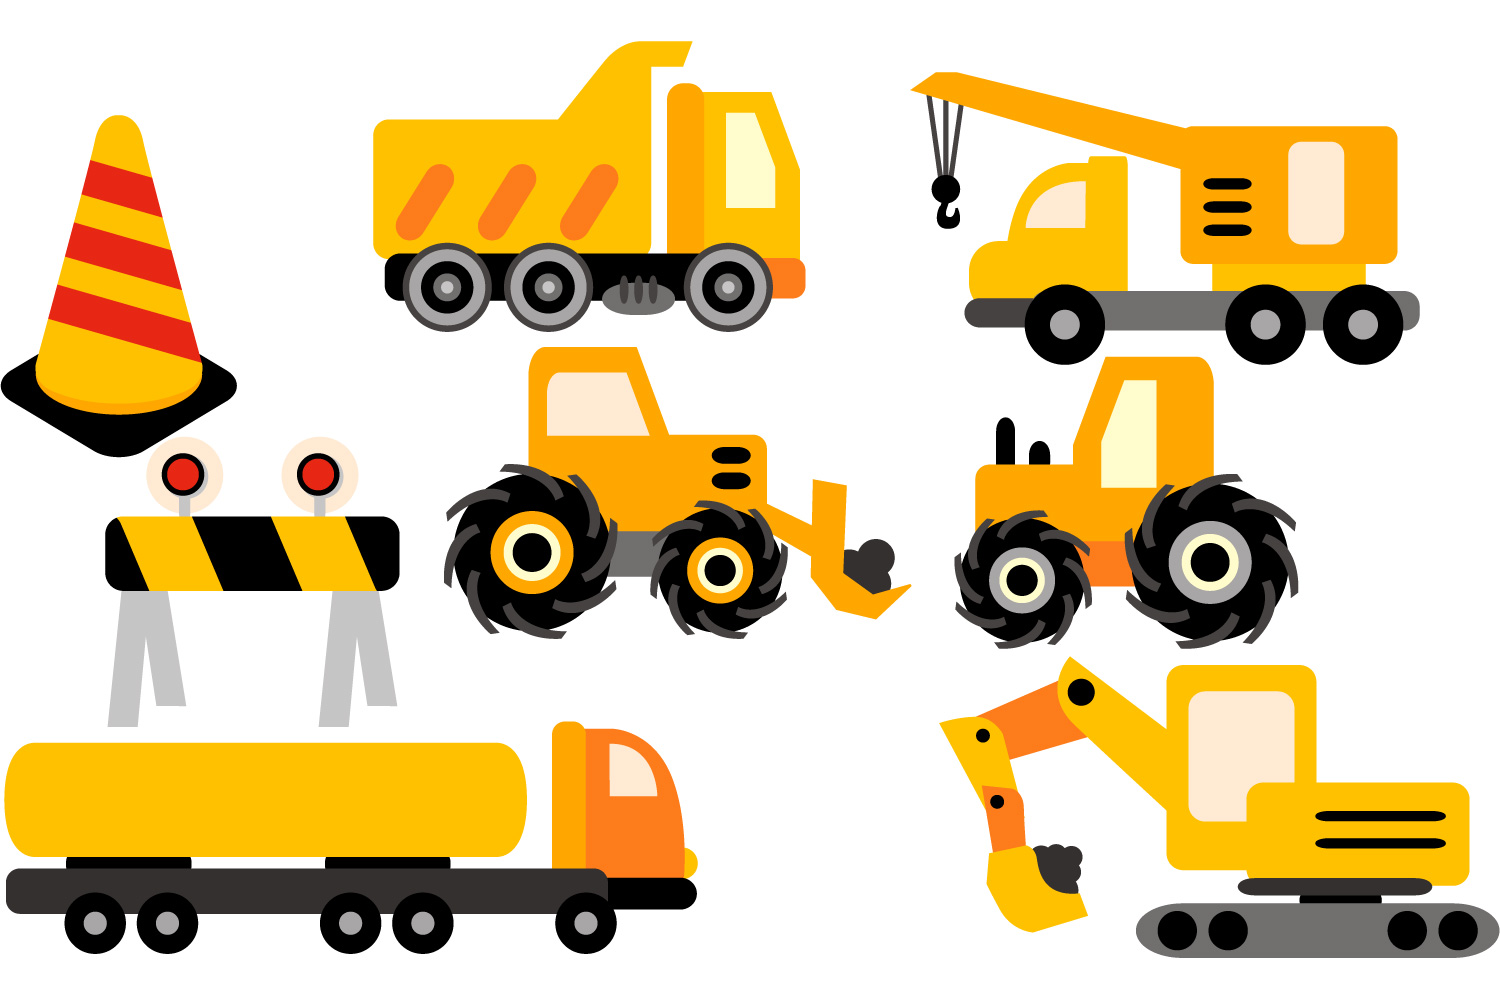 Construction Vehicles Clipart at GetDrawings Free download